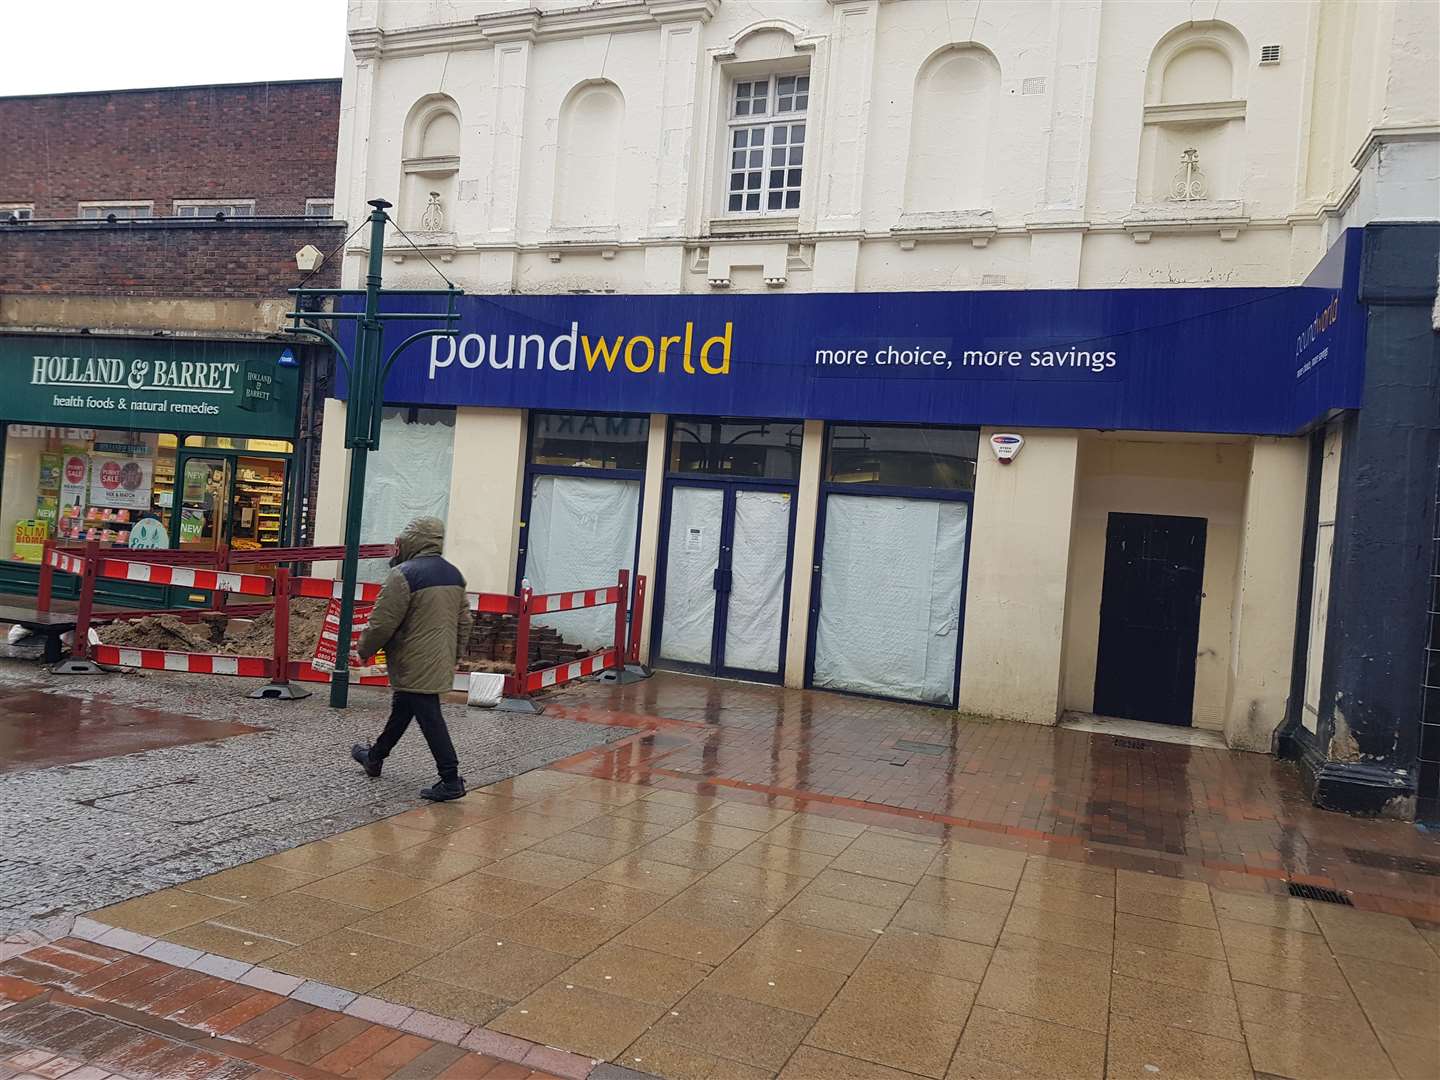 The former poundworld store in Chatham High Street